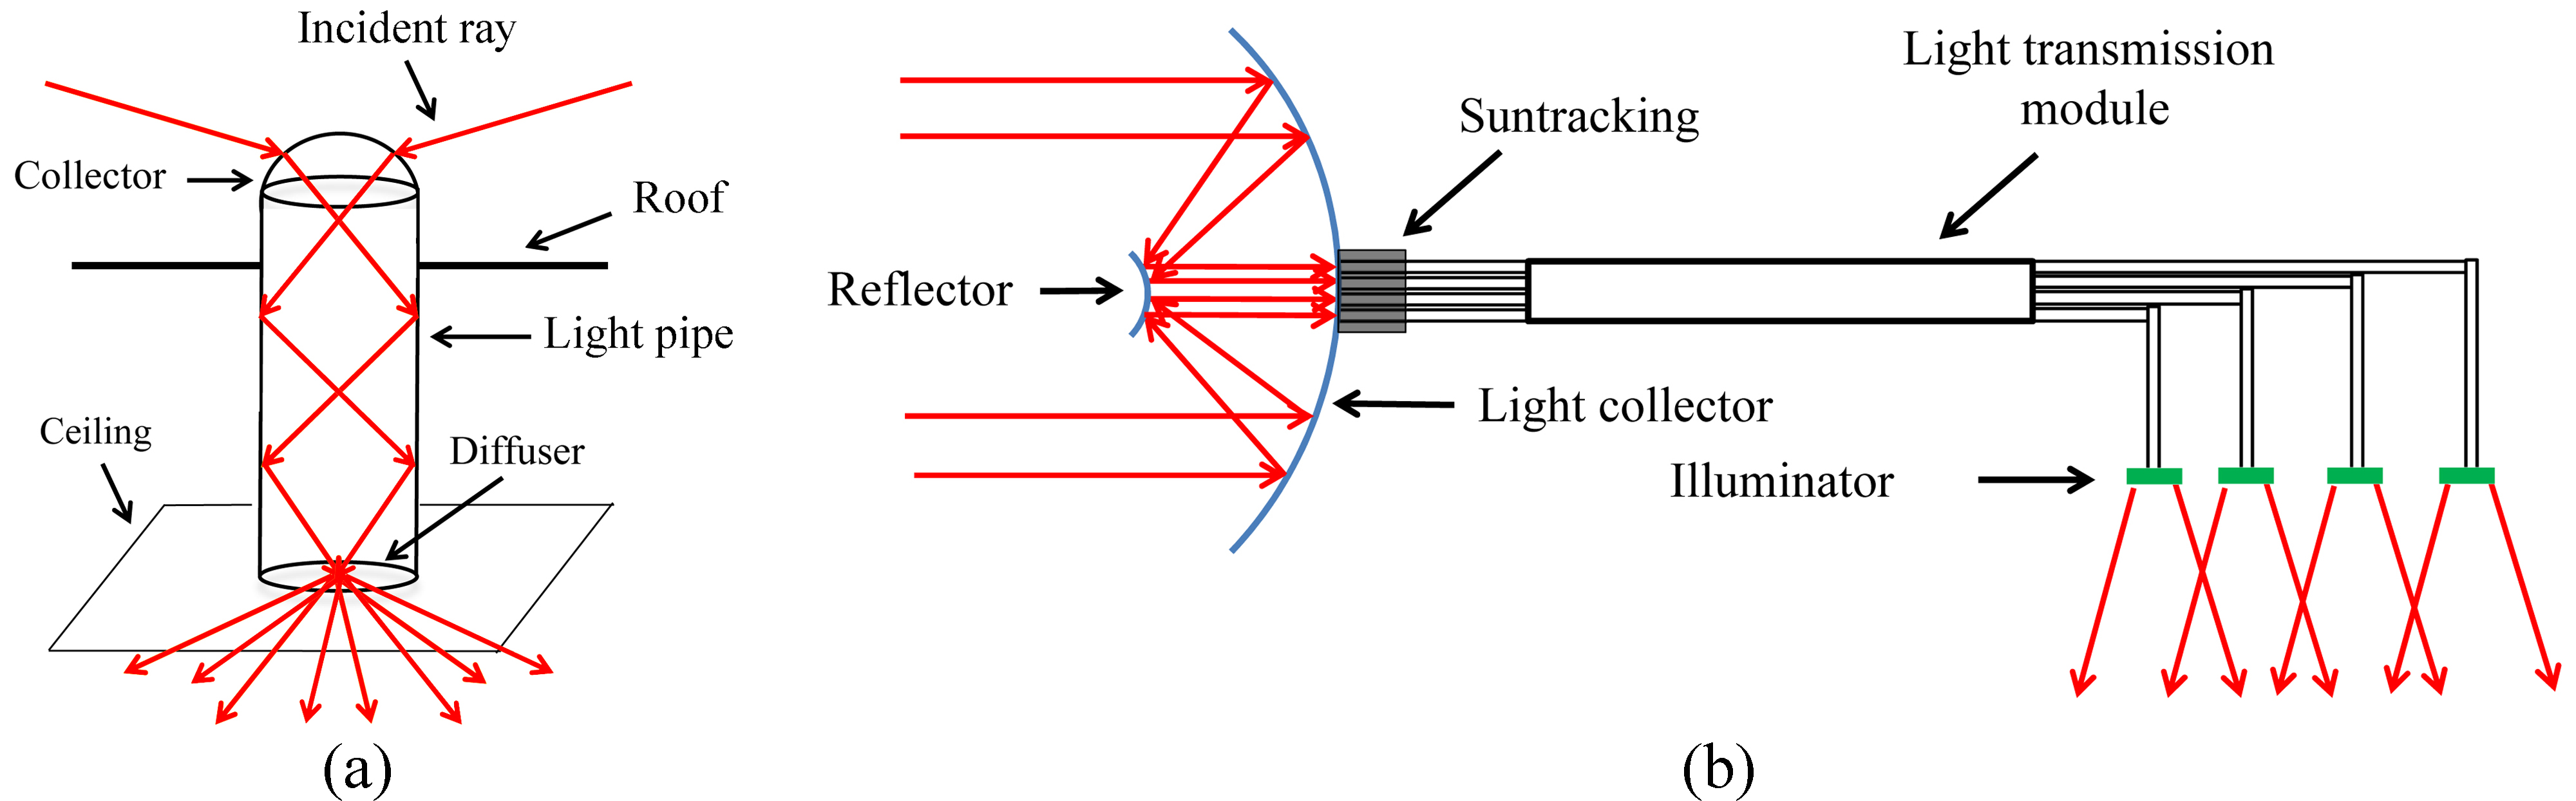 (a) Schematic representation of a light pipe daylighting system and (b) 2D schematic drawing of a optical fiber daylighting system consisting of collector, transmission, and illuminator modules.